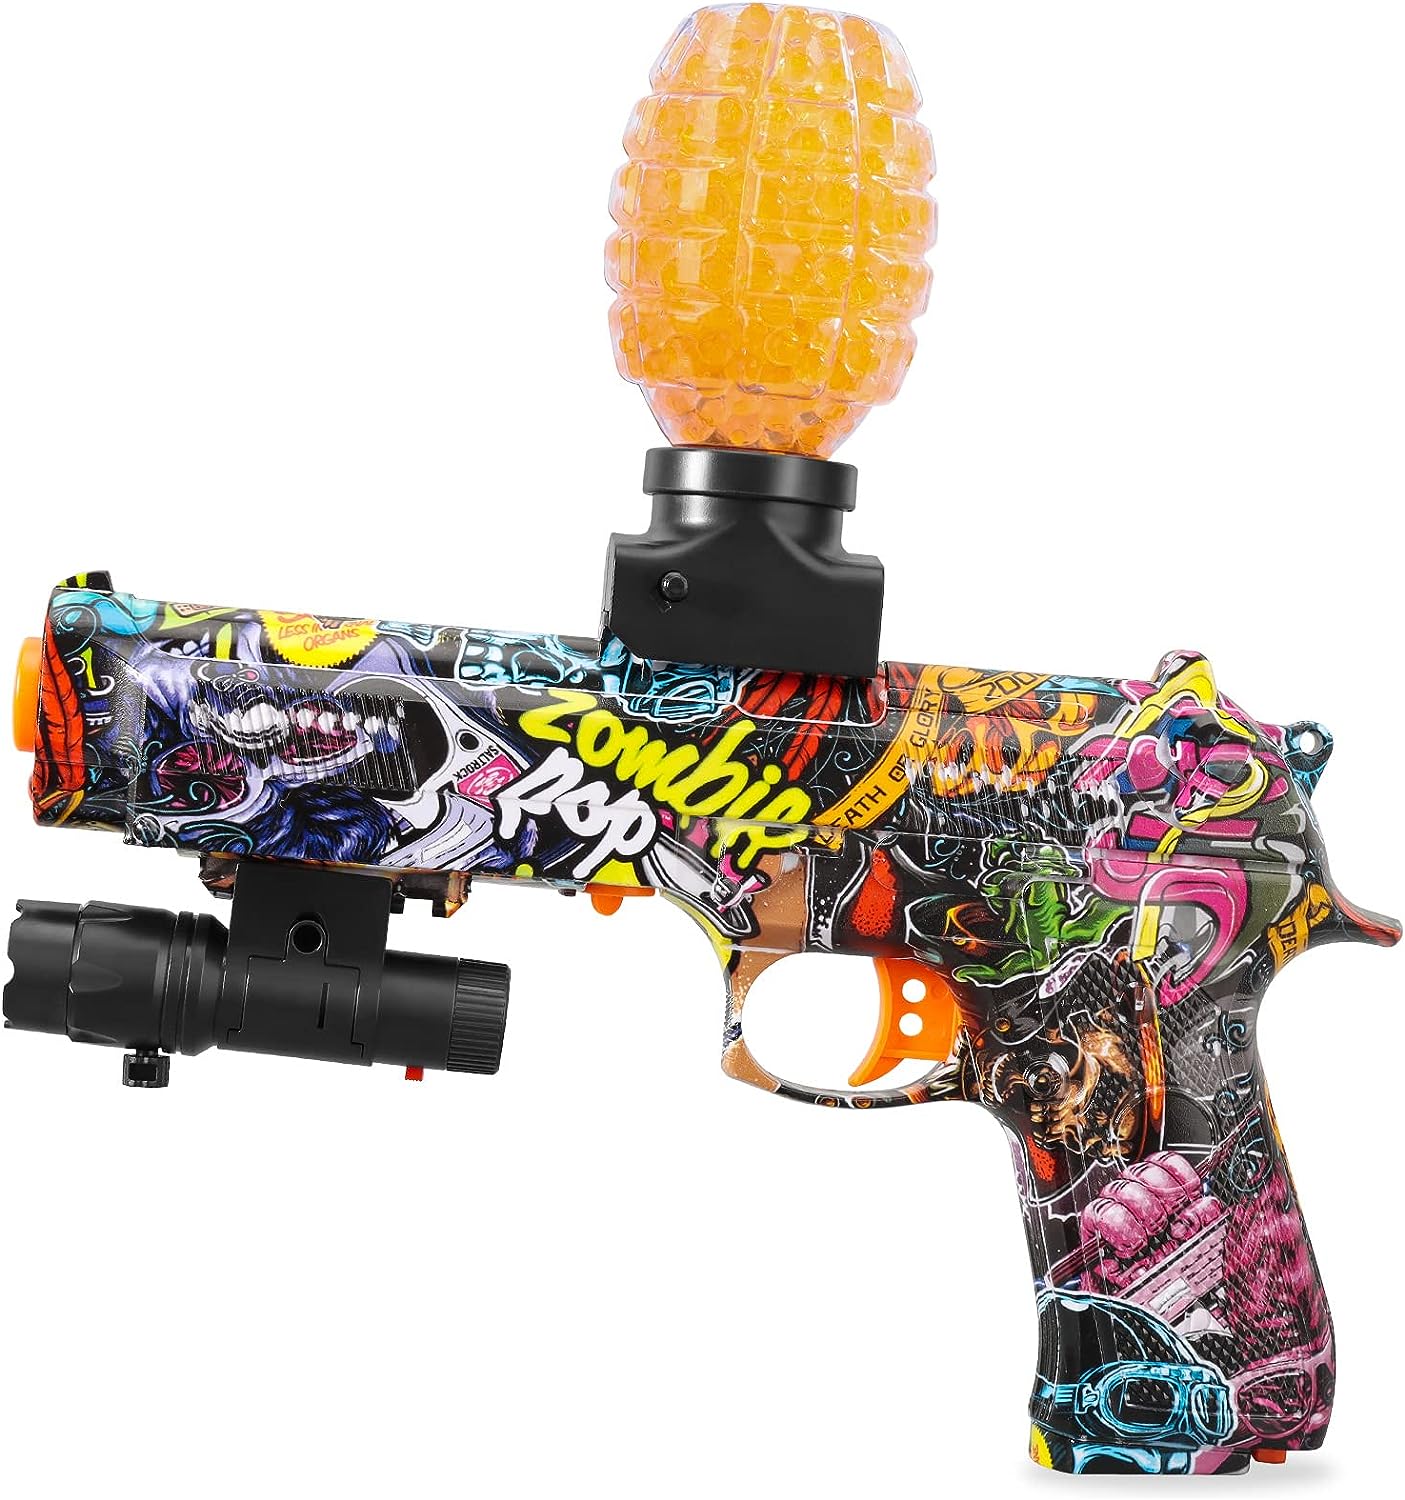 Eco-Friendly Orbeez Gun With 10,000 Gel Balls with Graffiti on it.